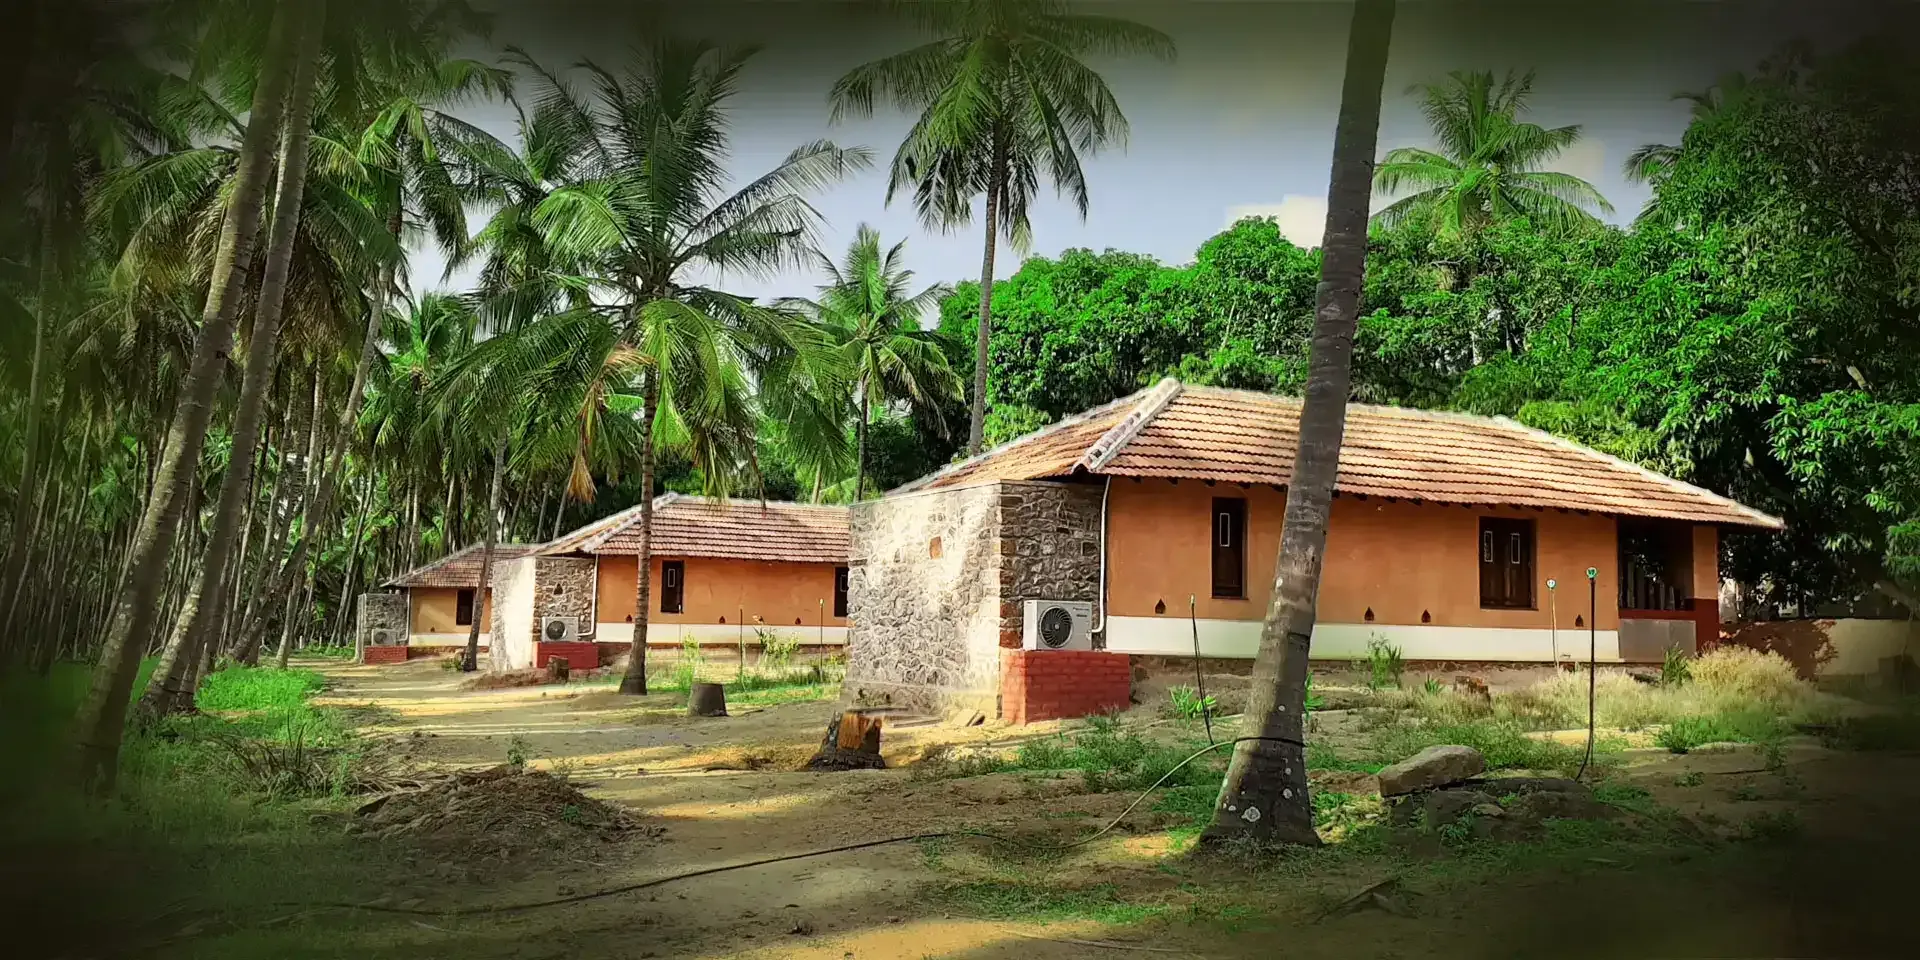 deluxe cottages for families at sethumadai, pollachi, coimbatore from "Down to Earth" Farmstay by Laksem